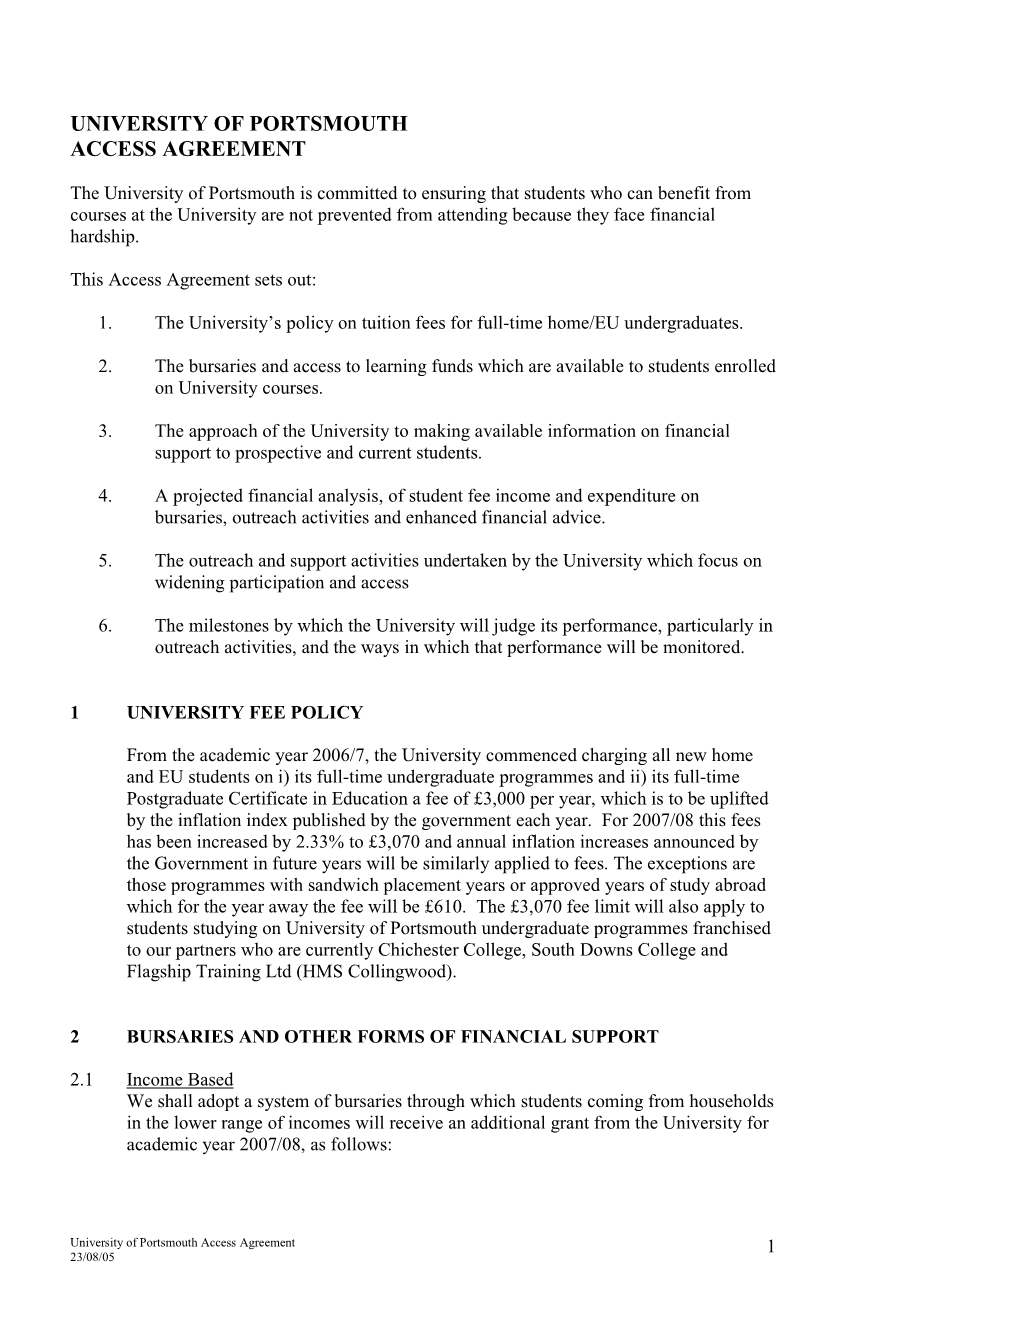 University of Portsmouth Access Agreement